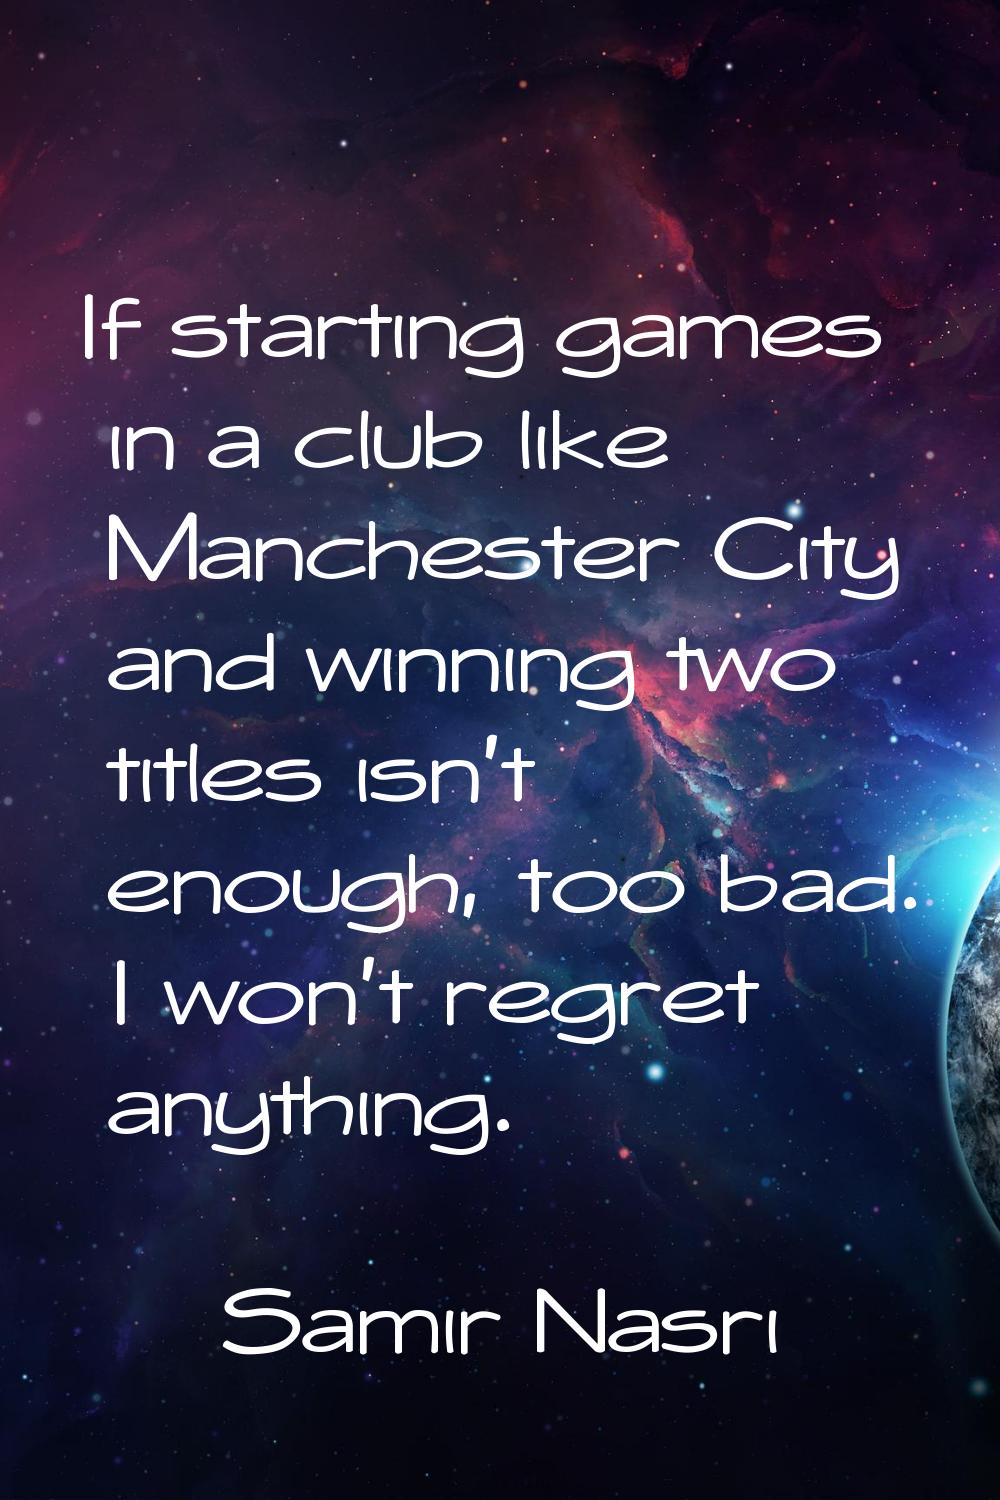 If starting games in a club like Manchester City and winning two titles isn't enough, too bad. I wo